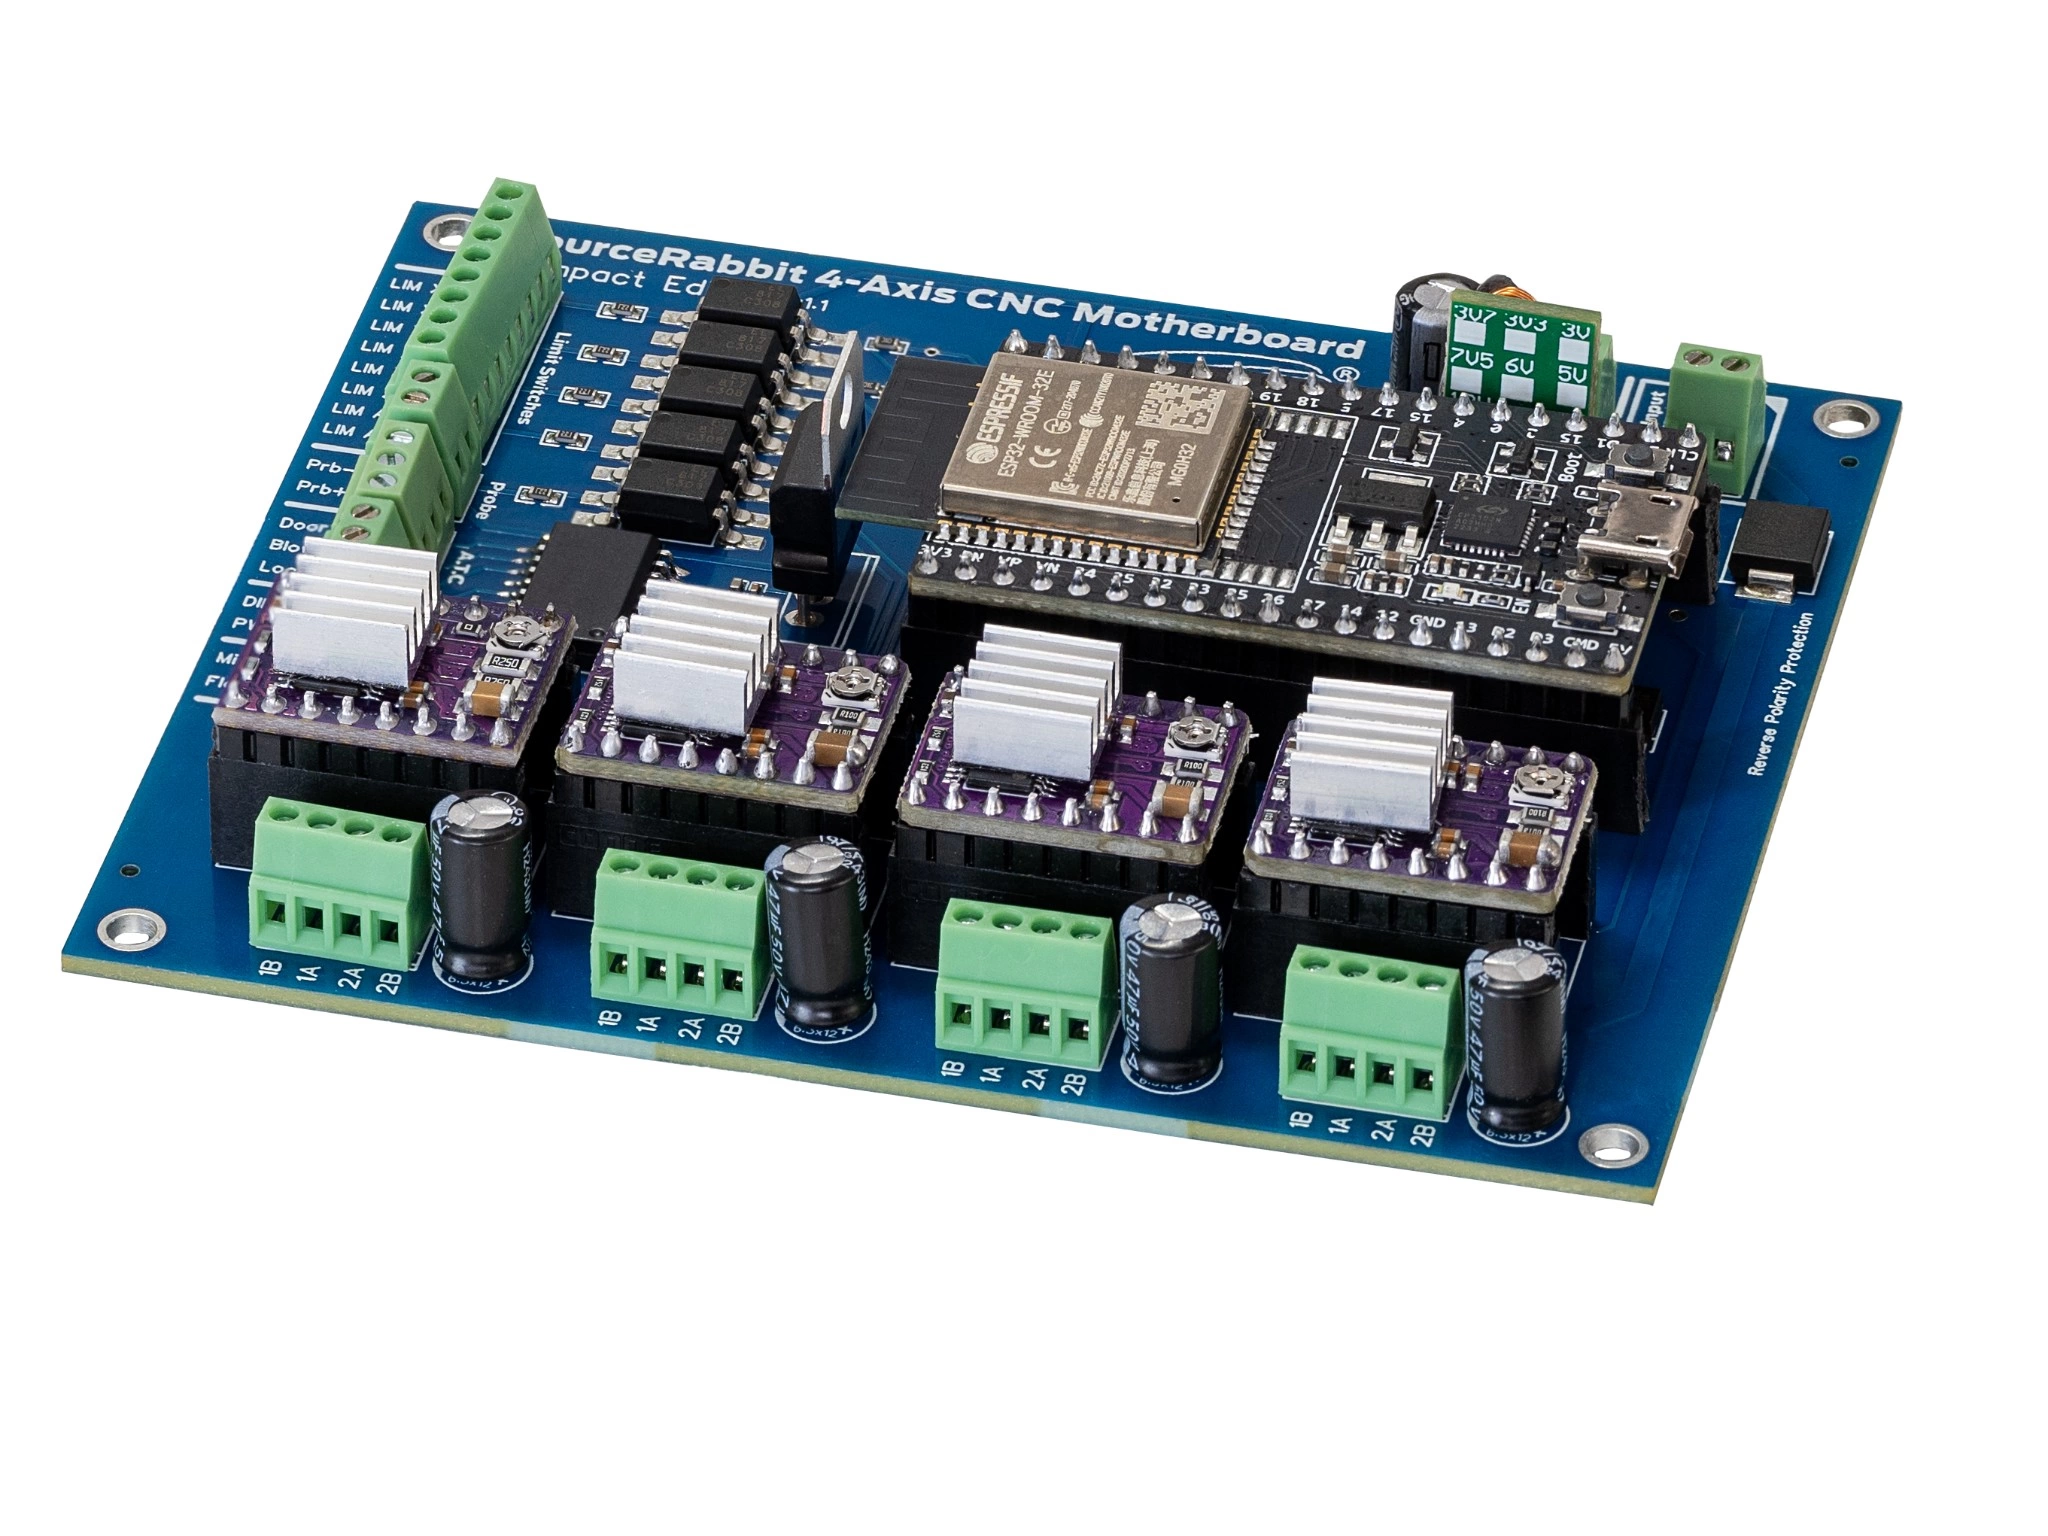 4-Axis CNC Motherboard Compact Edition view 2